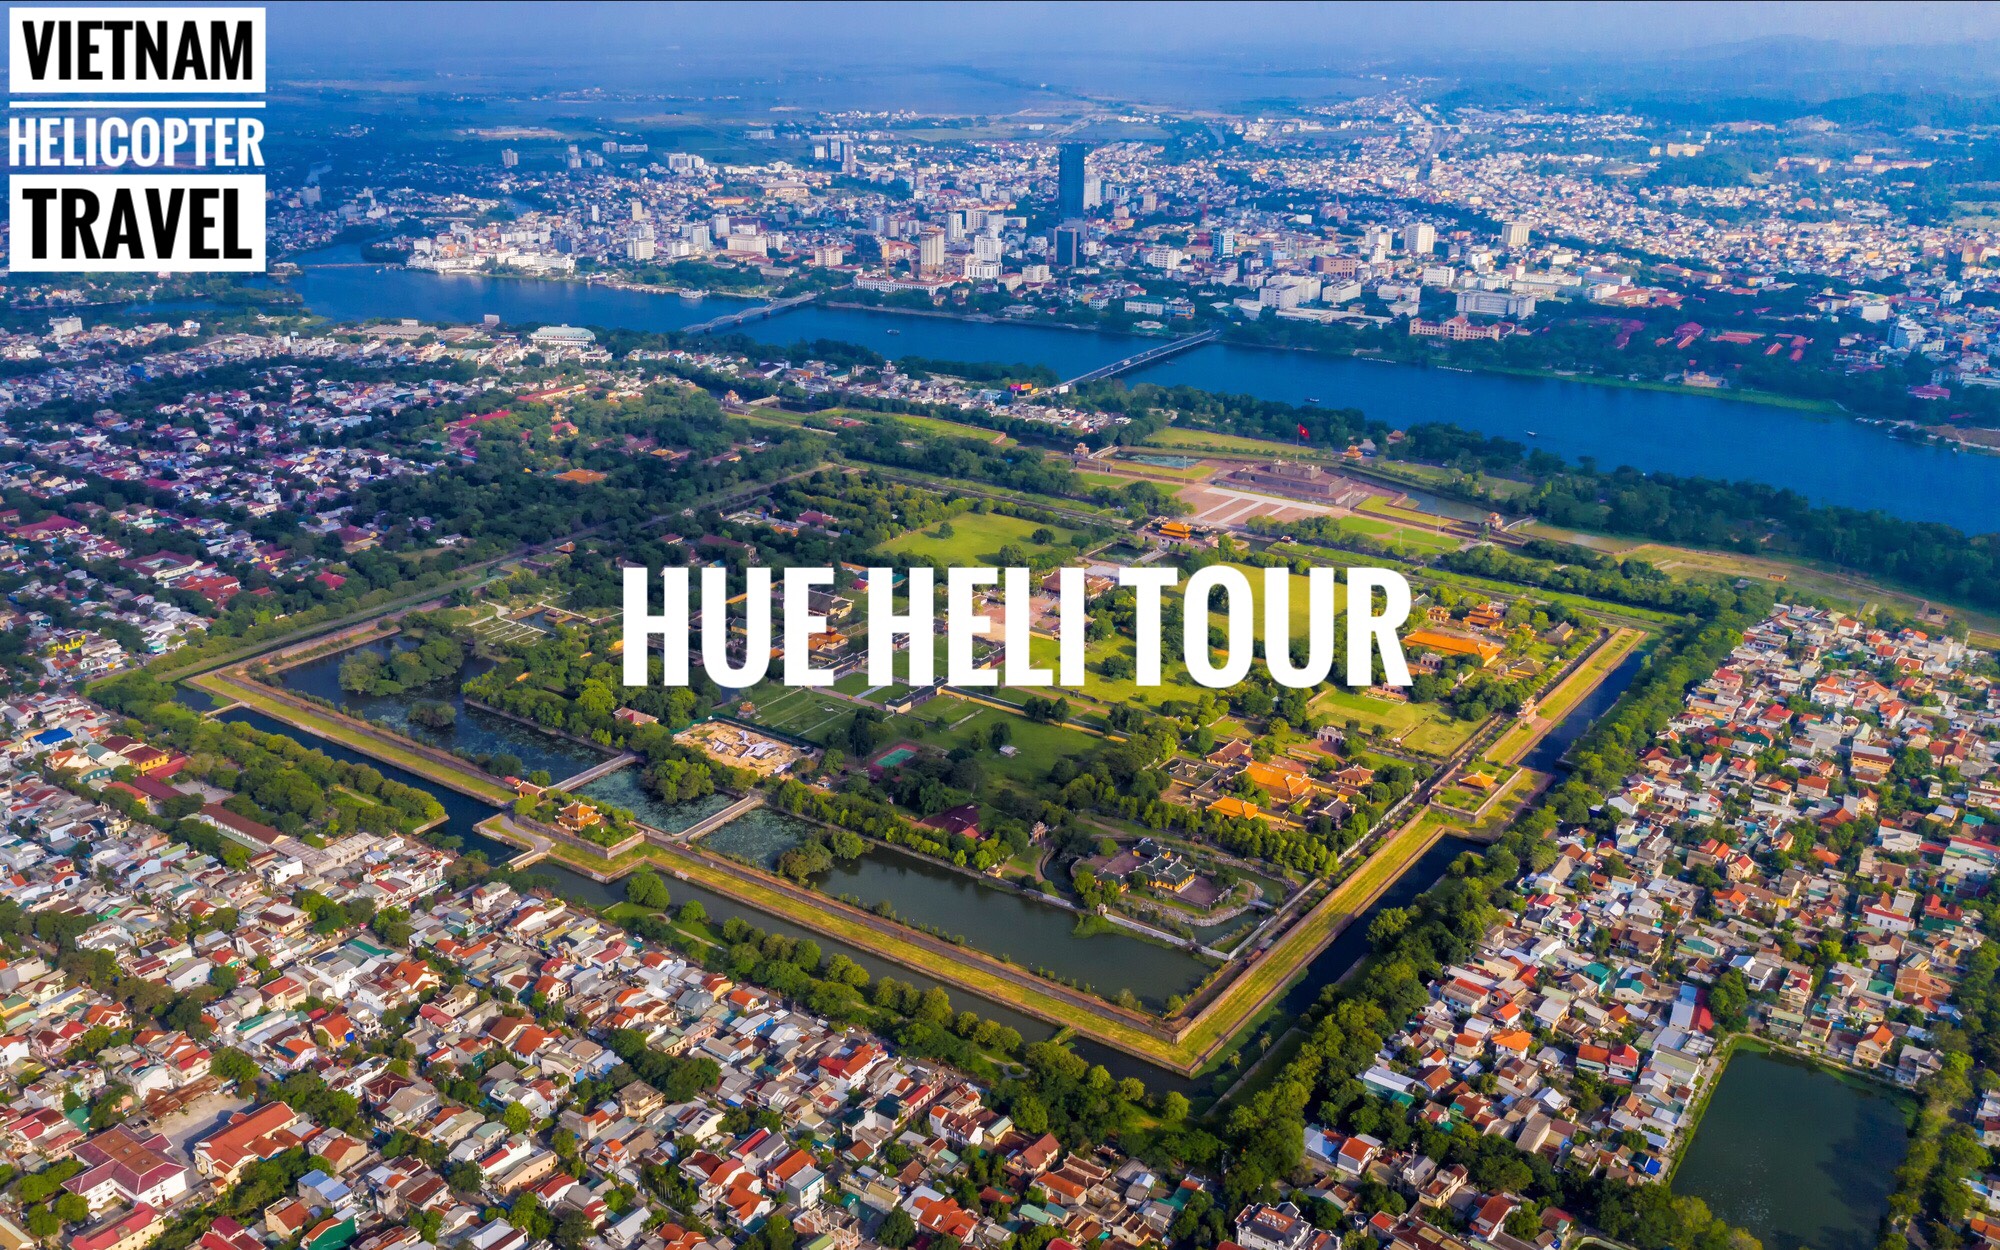 Useful Tips for Helicopter Tour To Hue Imperial City By VietNam Helicopter Travel